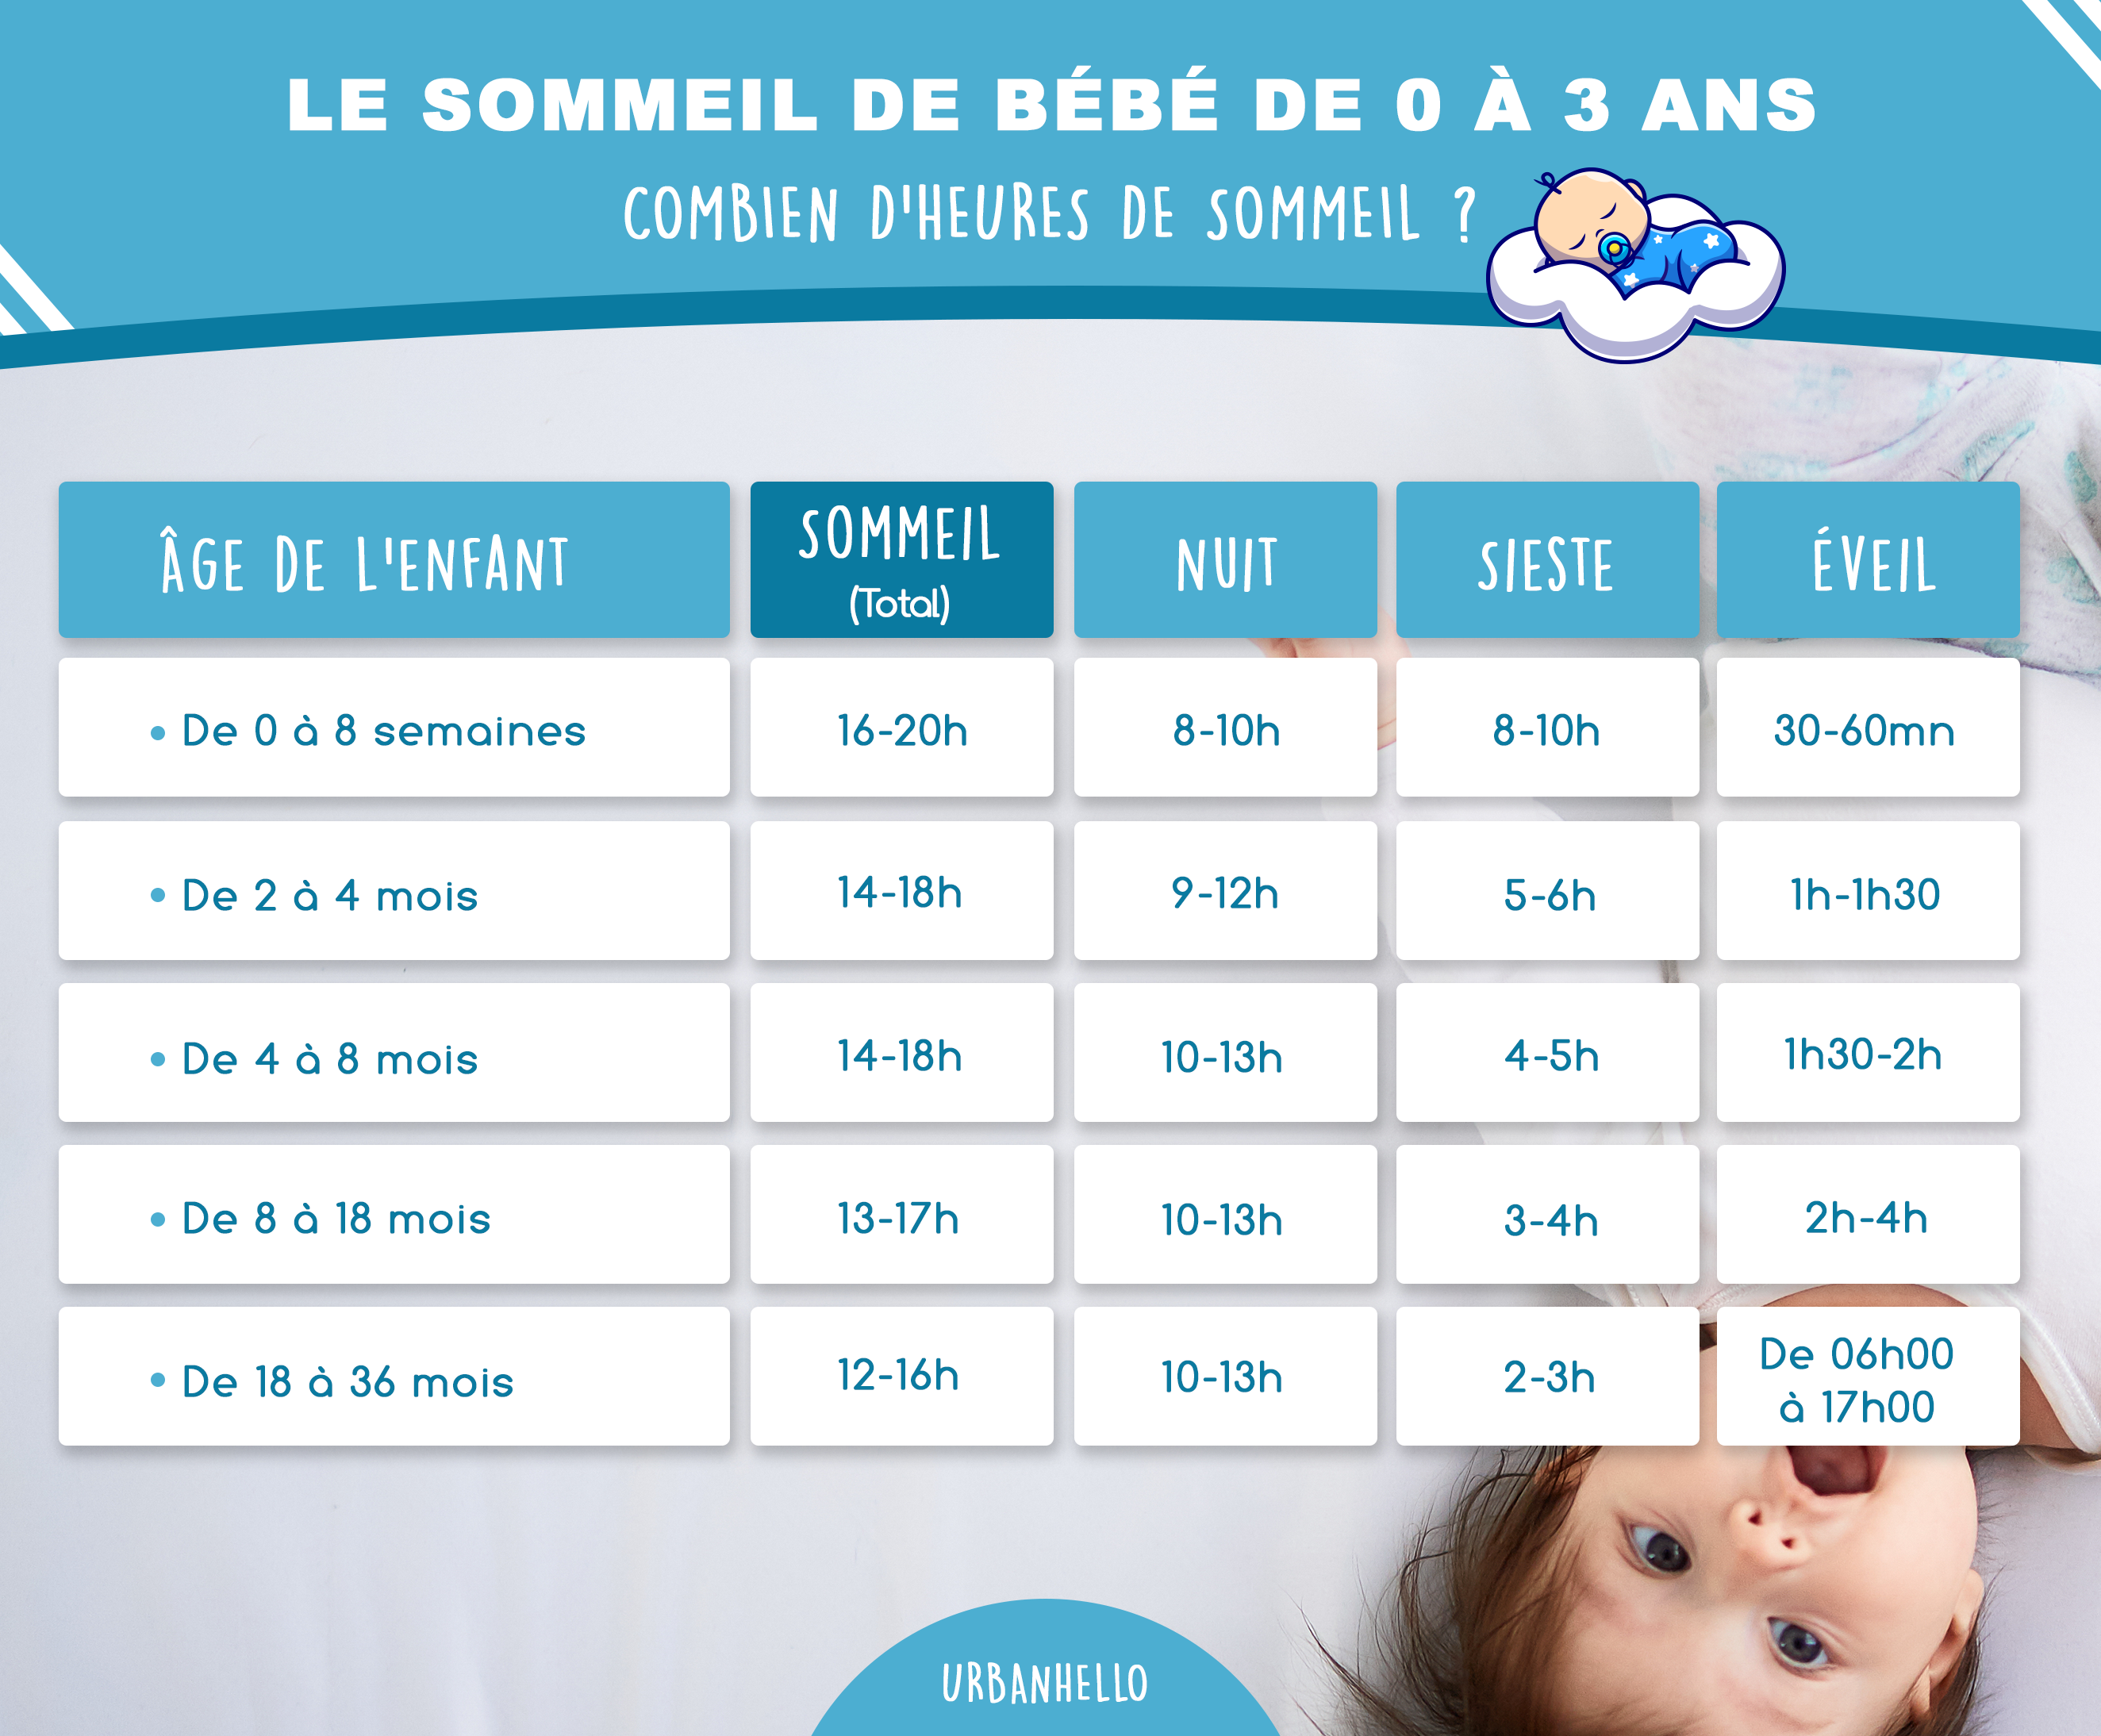 https://www.urbanhello.com/img/cms/infographie-sommeil-bebe.png